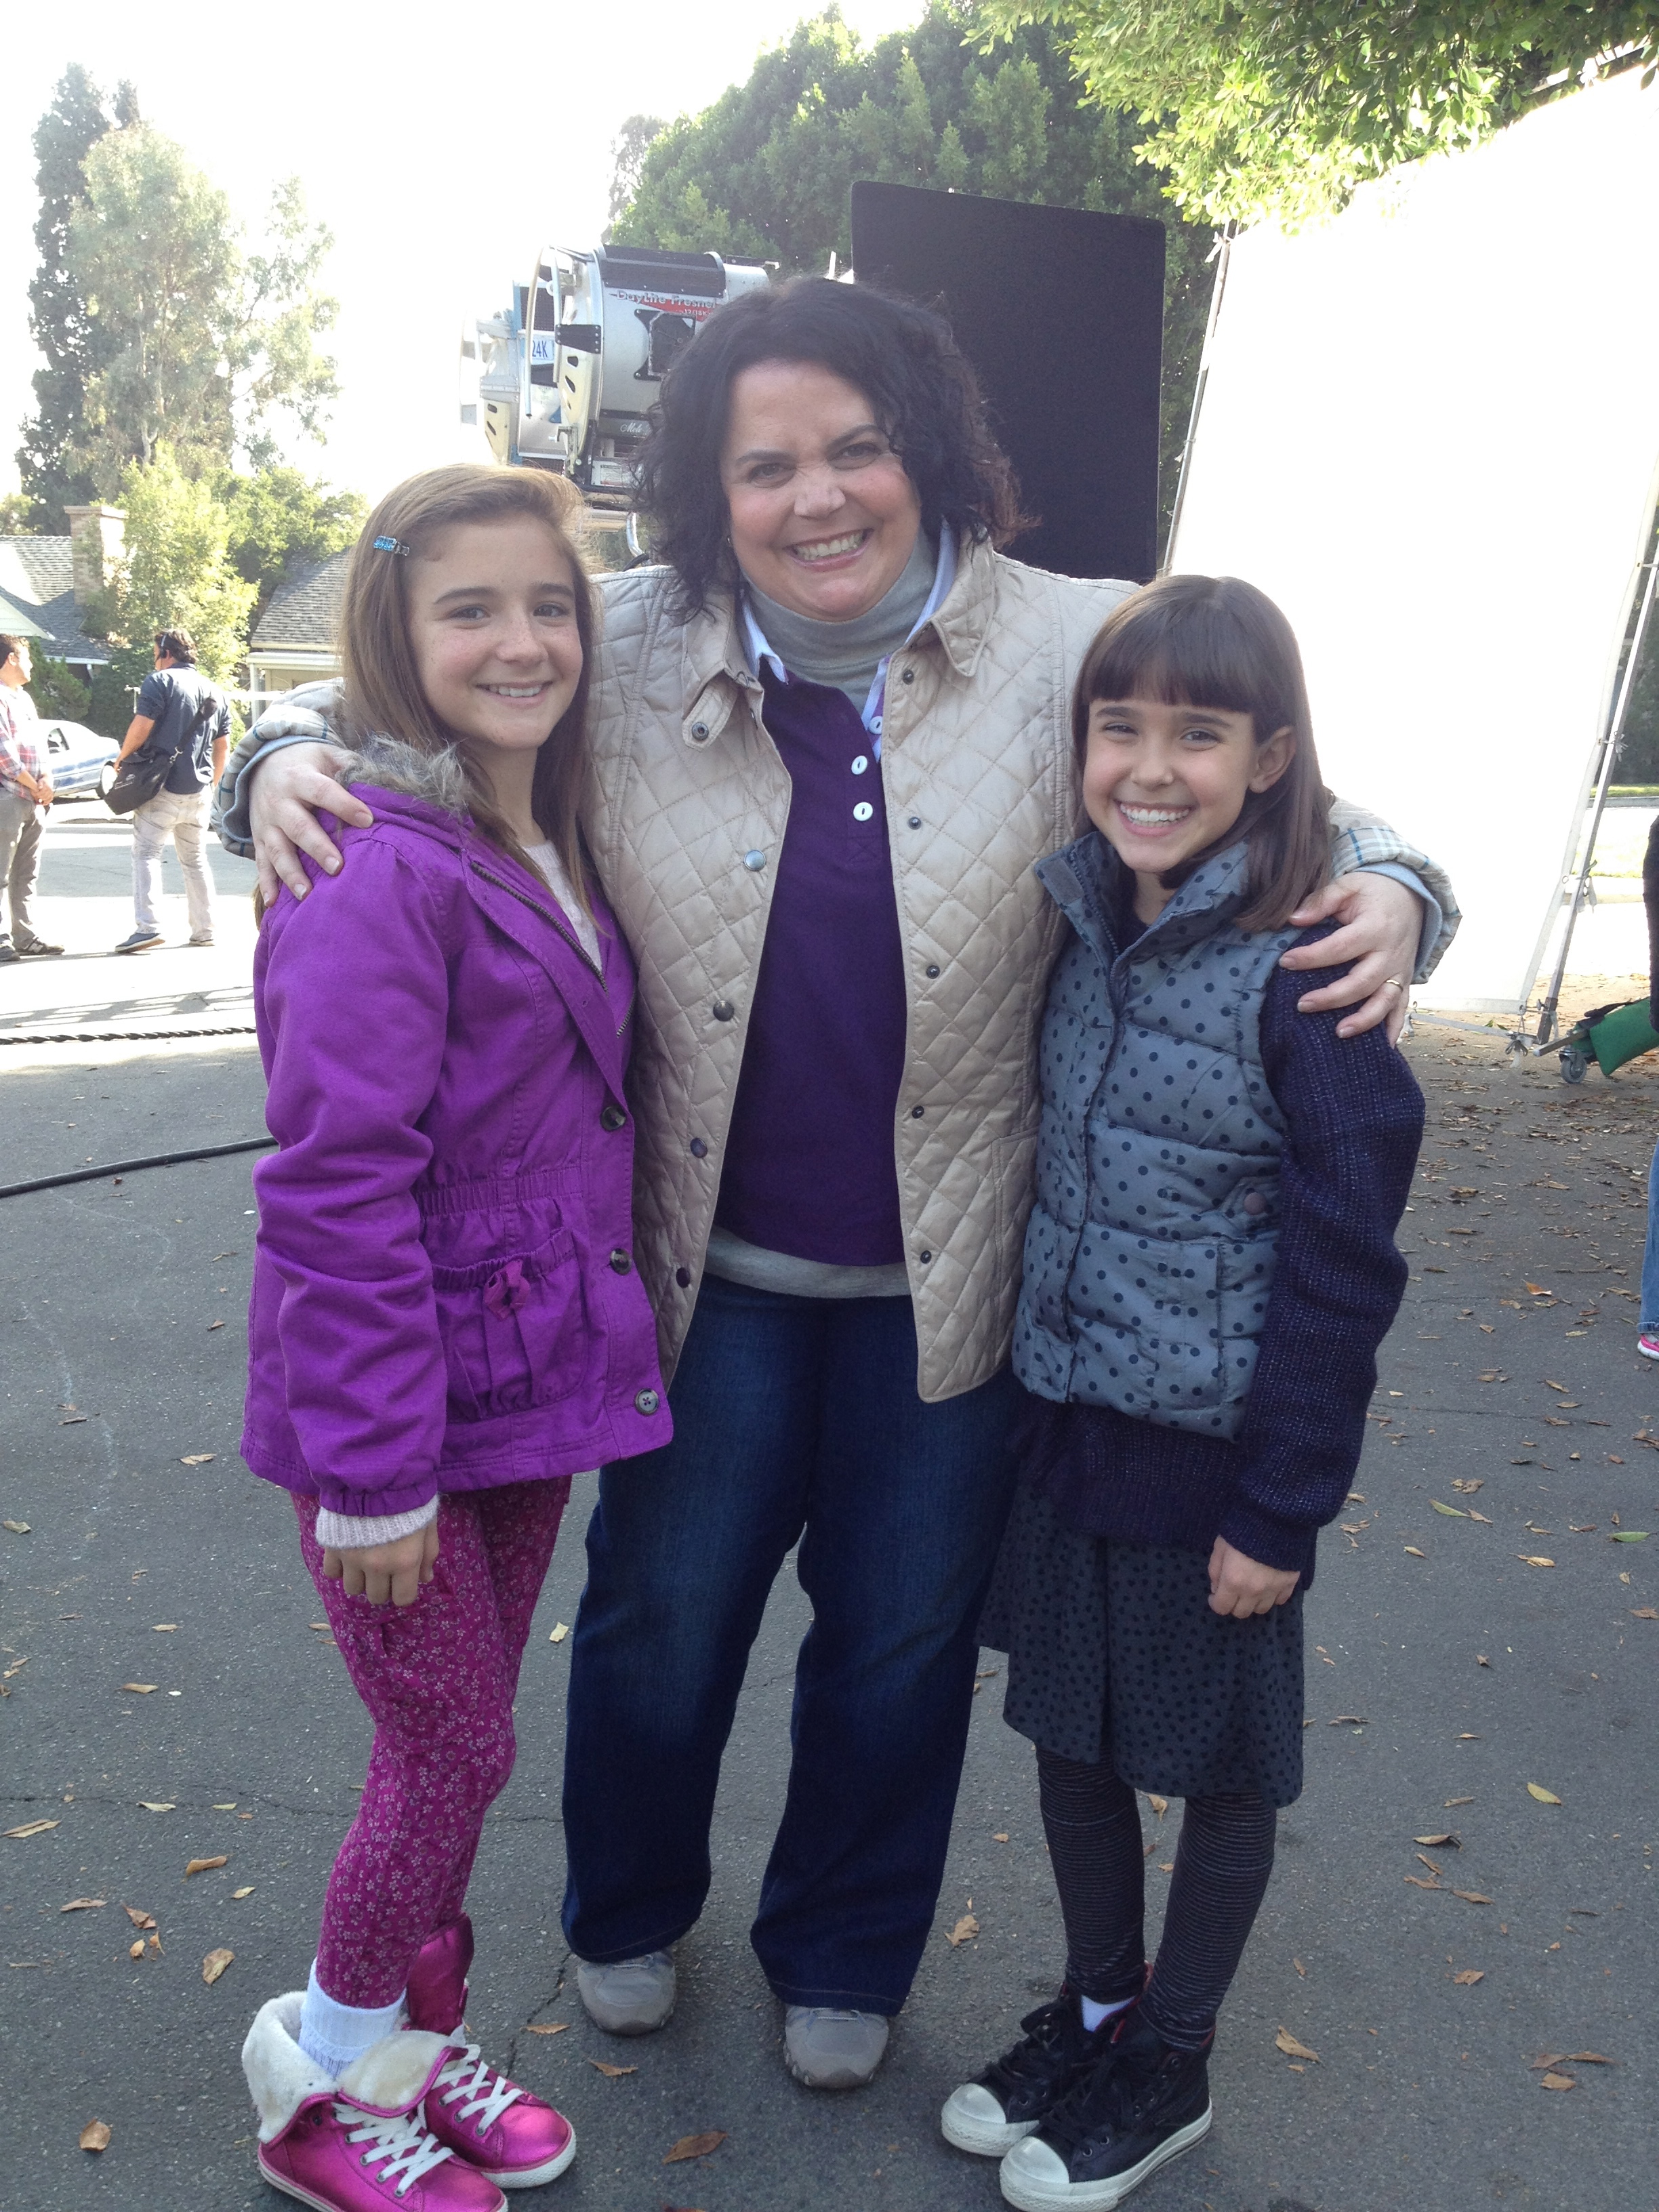 Molly Jackson, Laura Ann Kesling, and Jen Ray on the set of The Middle.